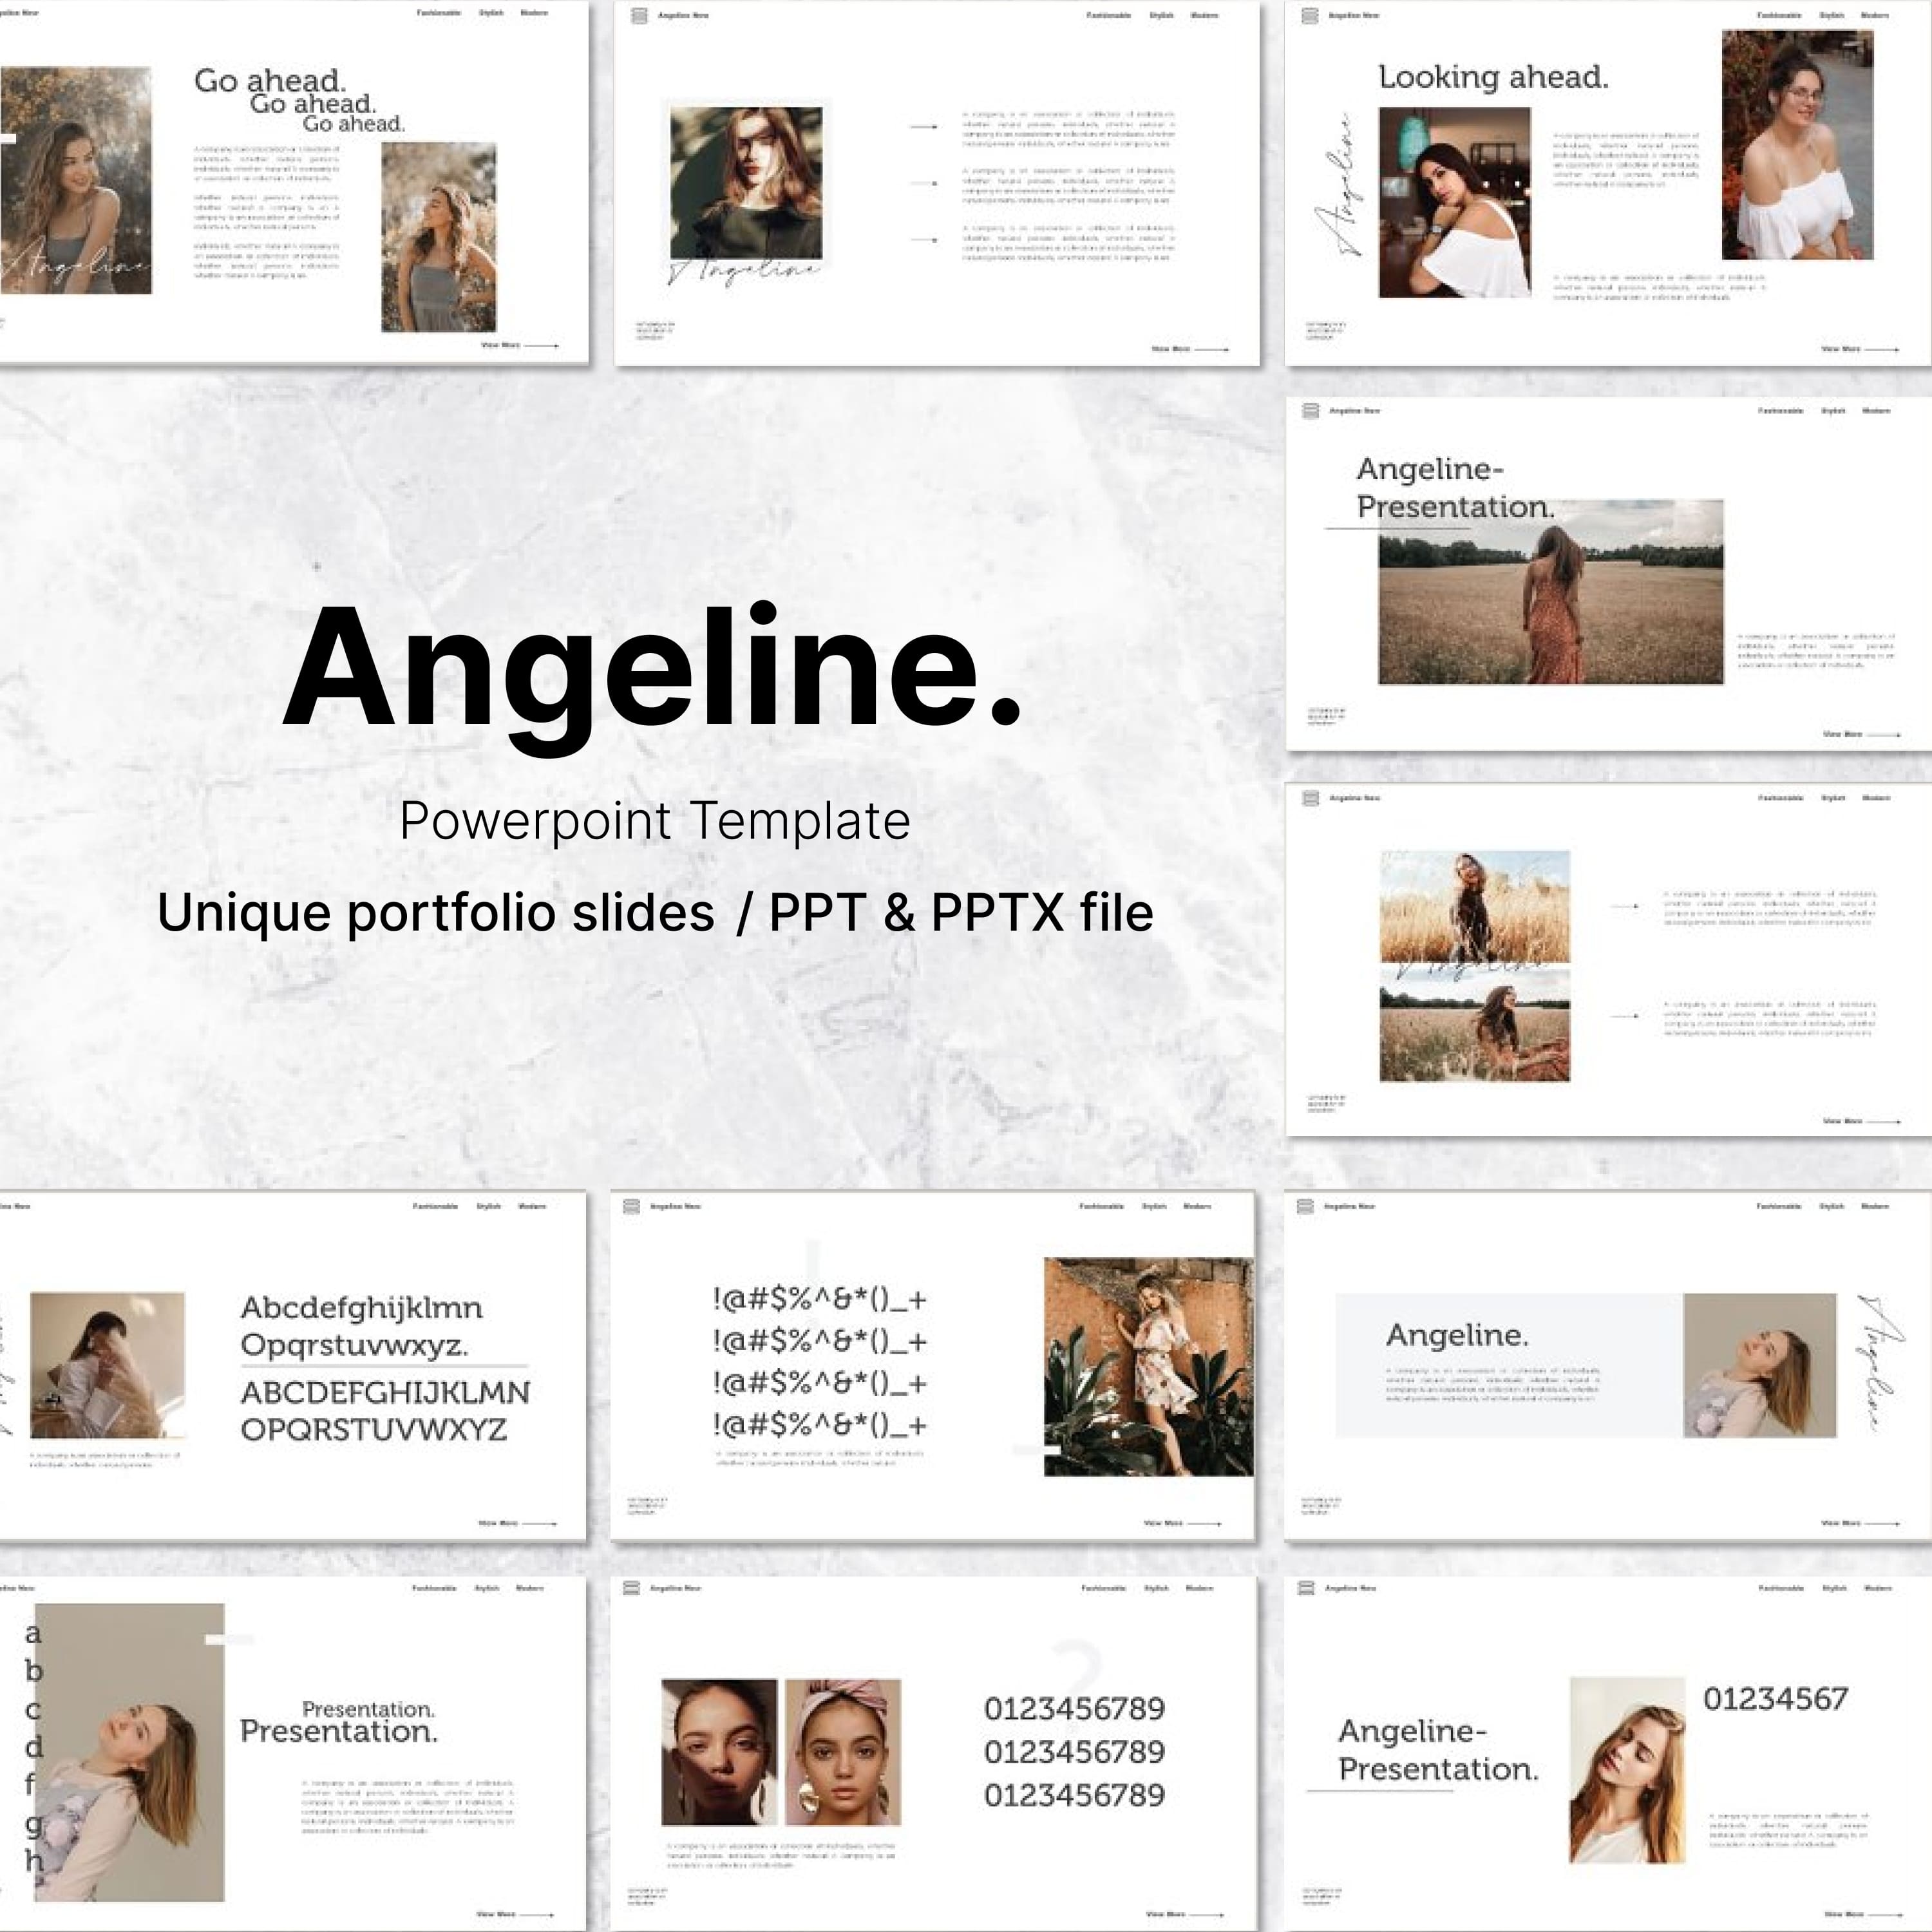 Angeline Powerpoint Template - main image preview.